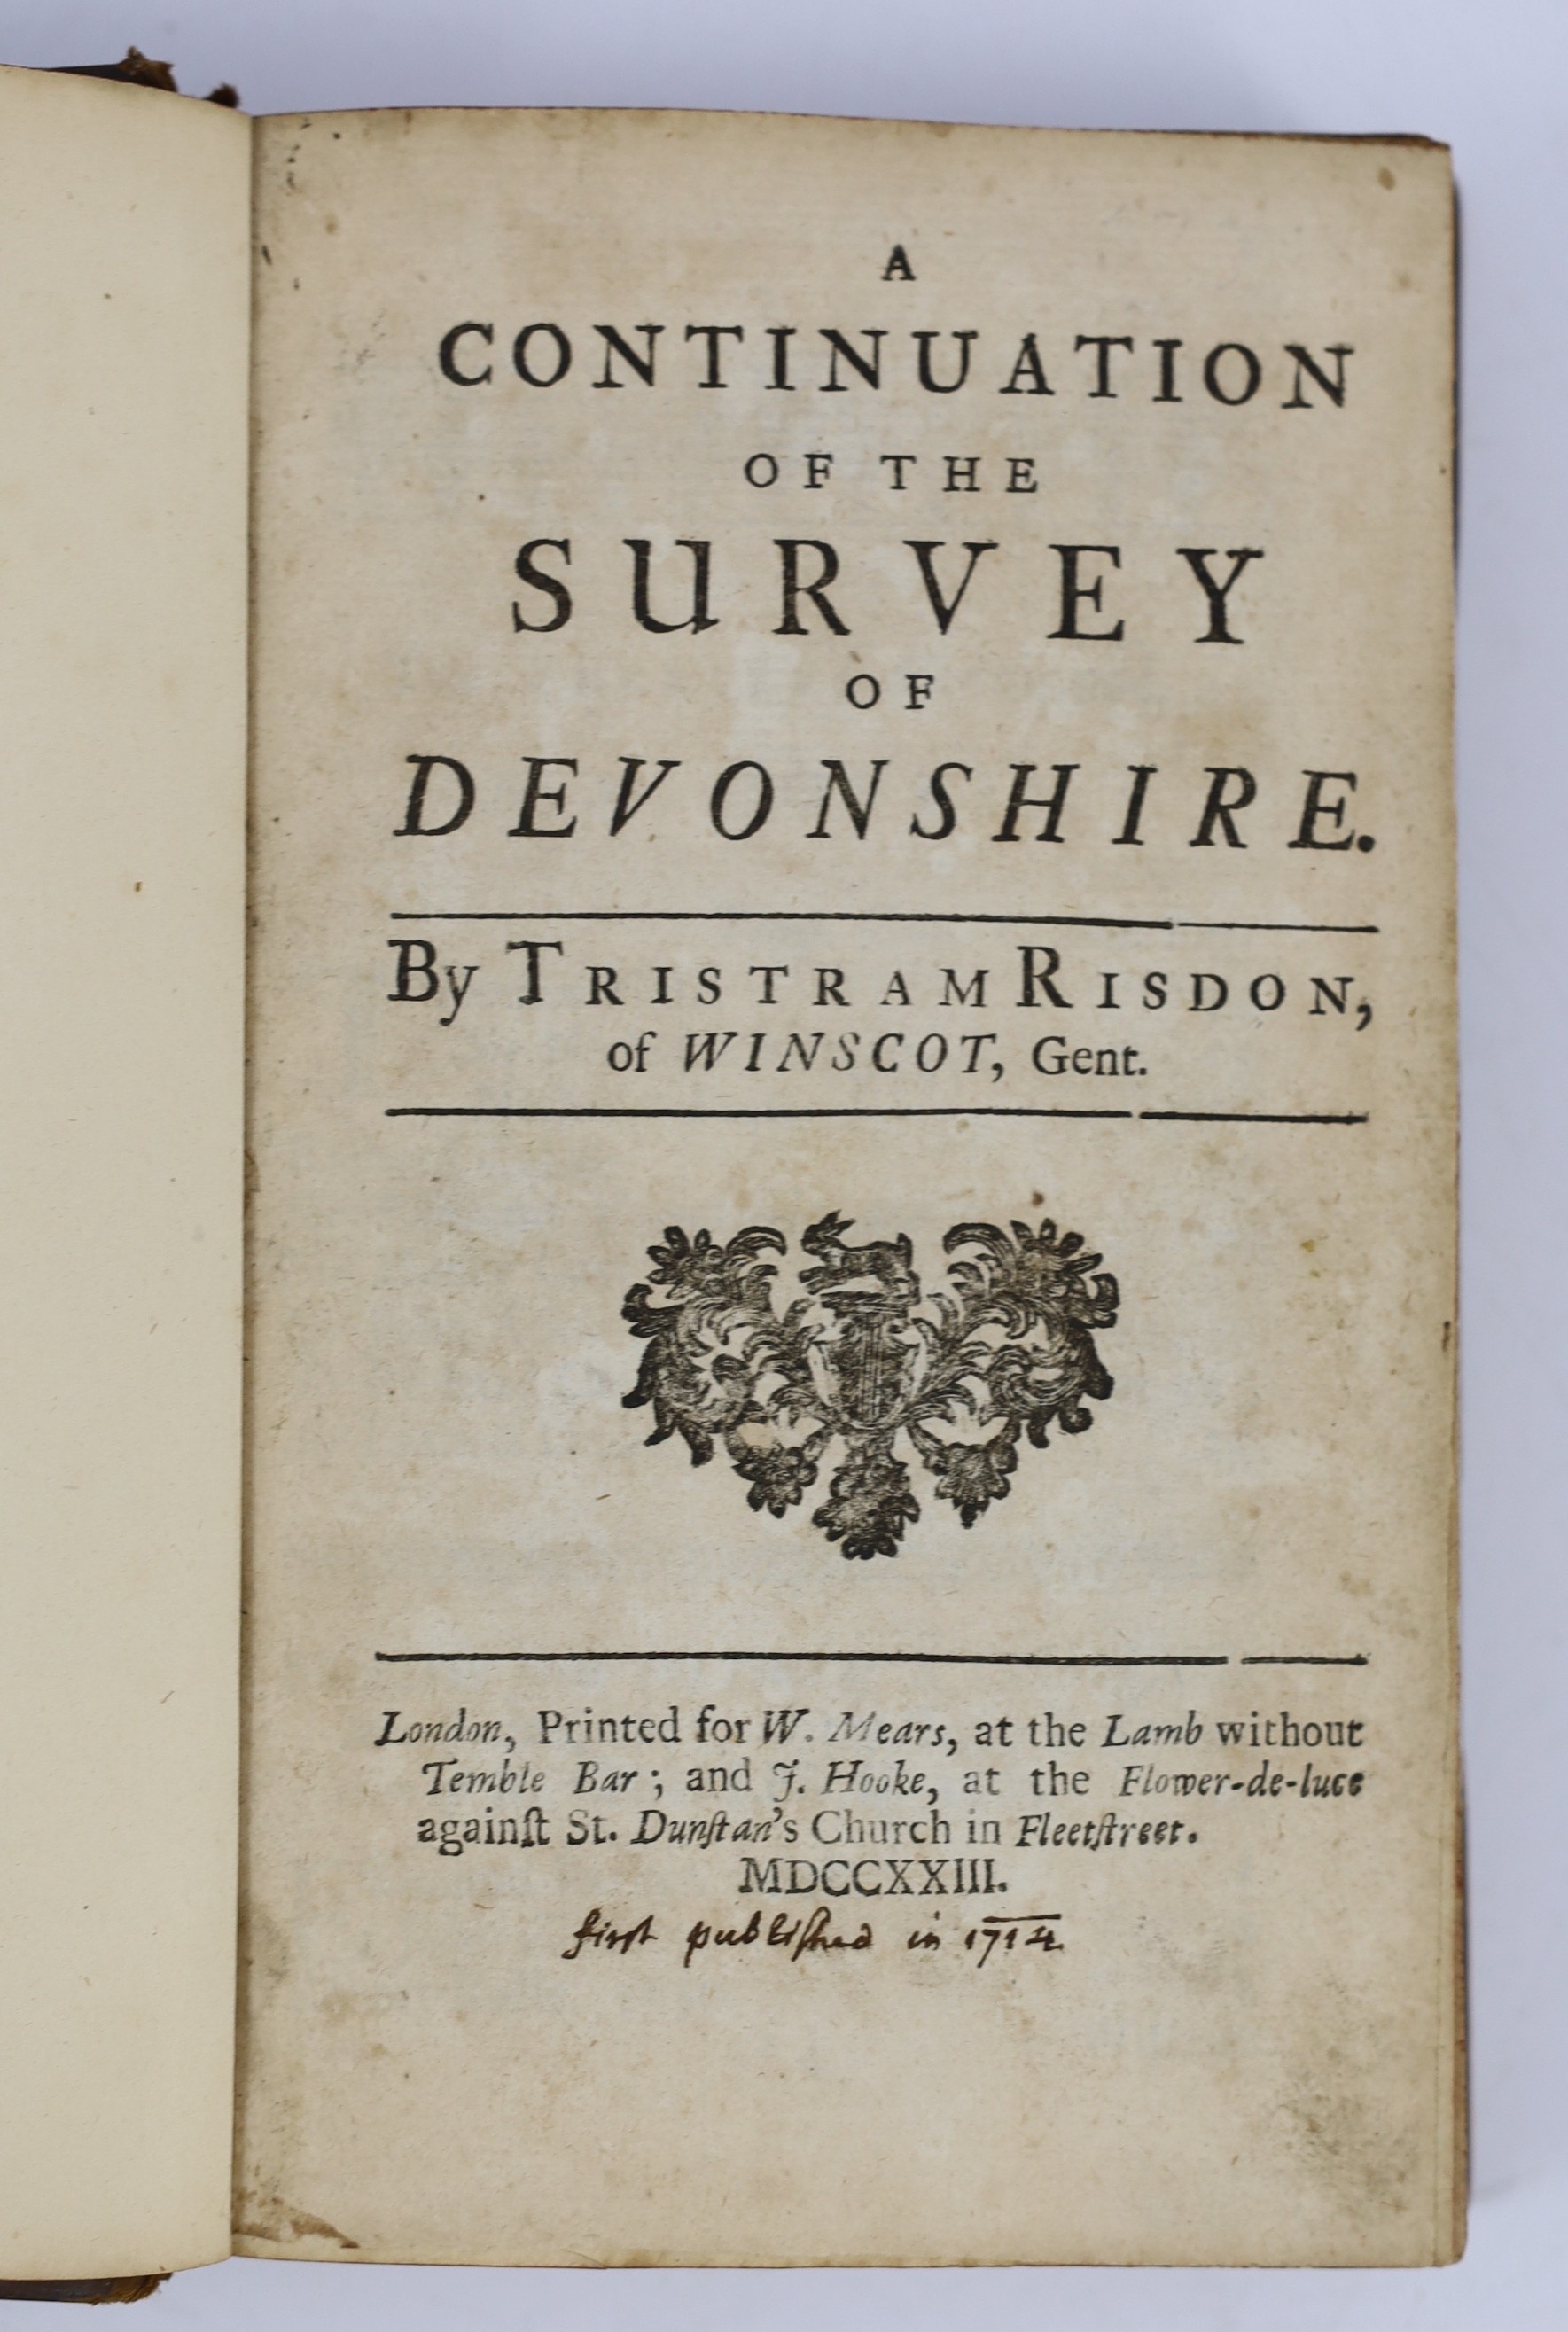 DEVON: Risdon, Tristram - A Continuation of the Survey of Devonshire ... (2nd edition). text decorations; old gilt-decorated half calf and cloth with panelled spine